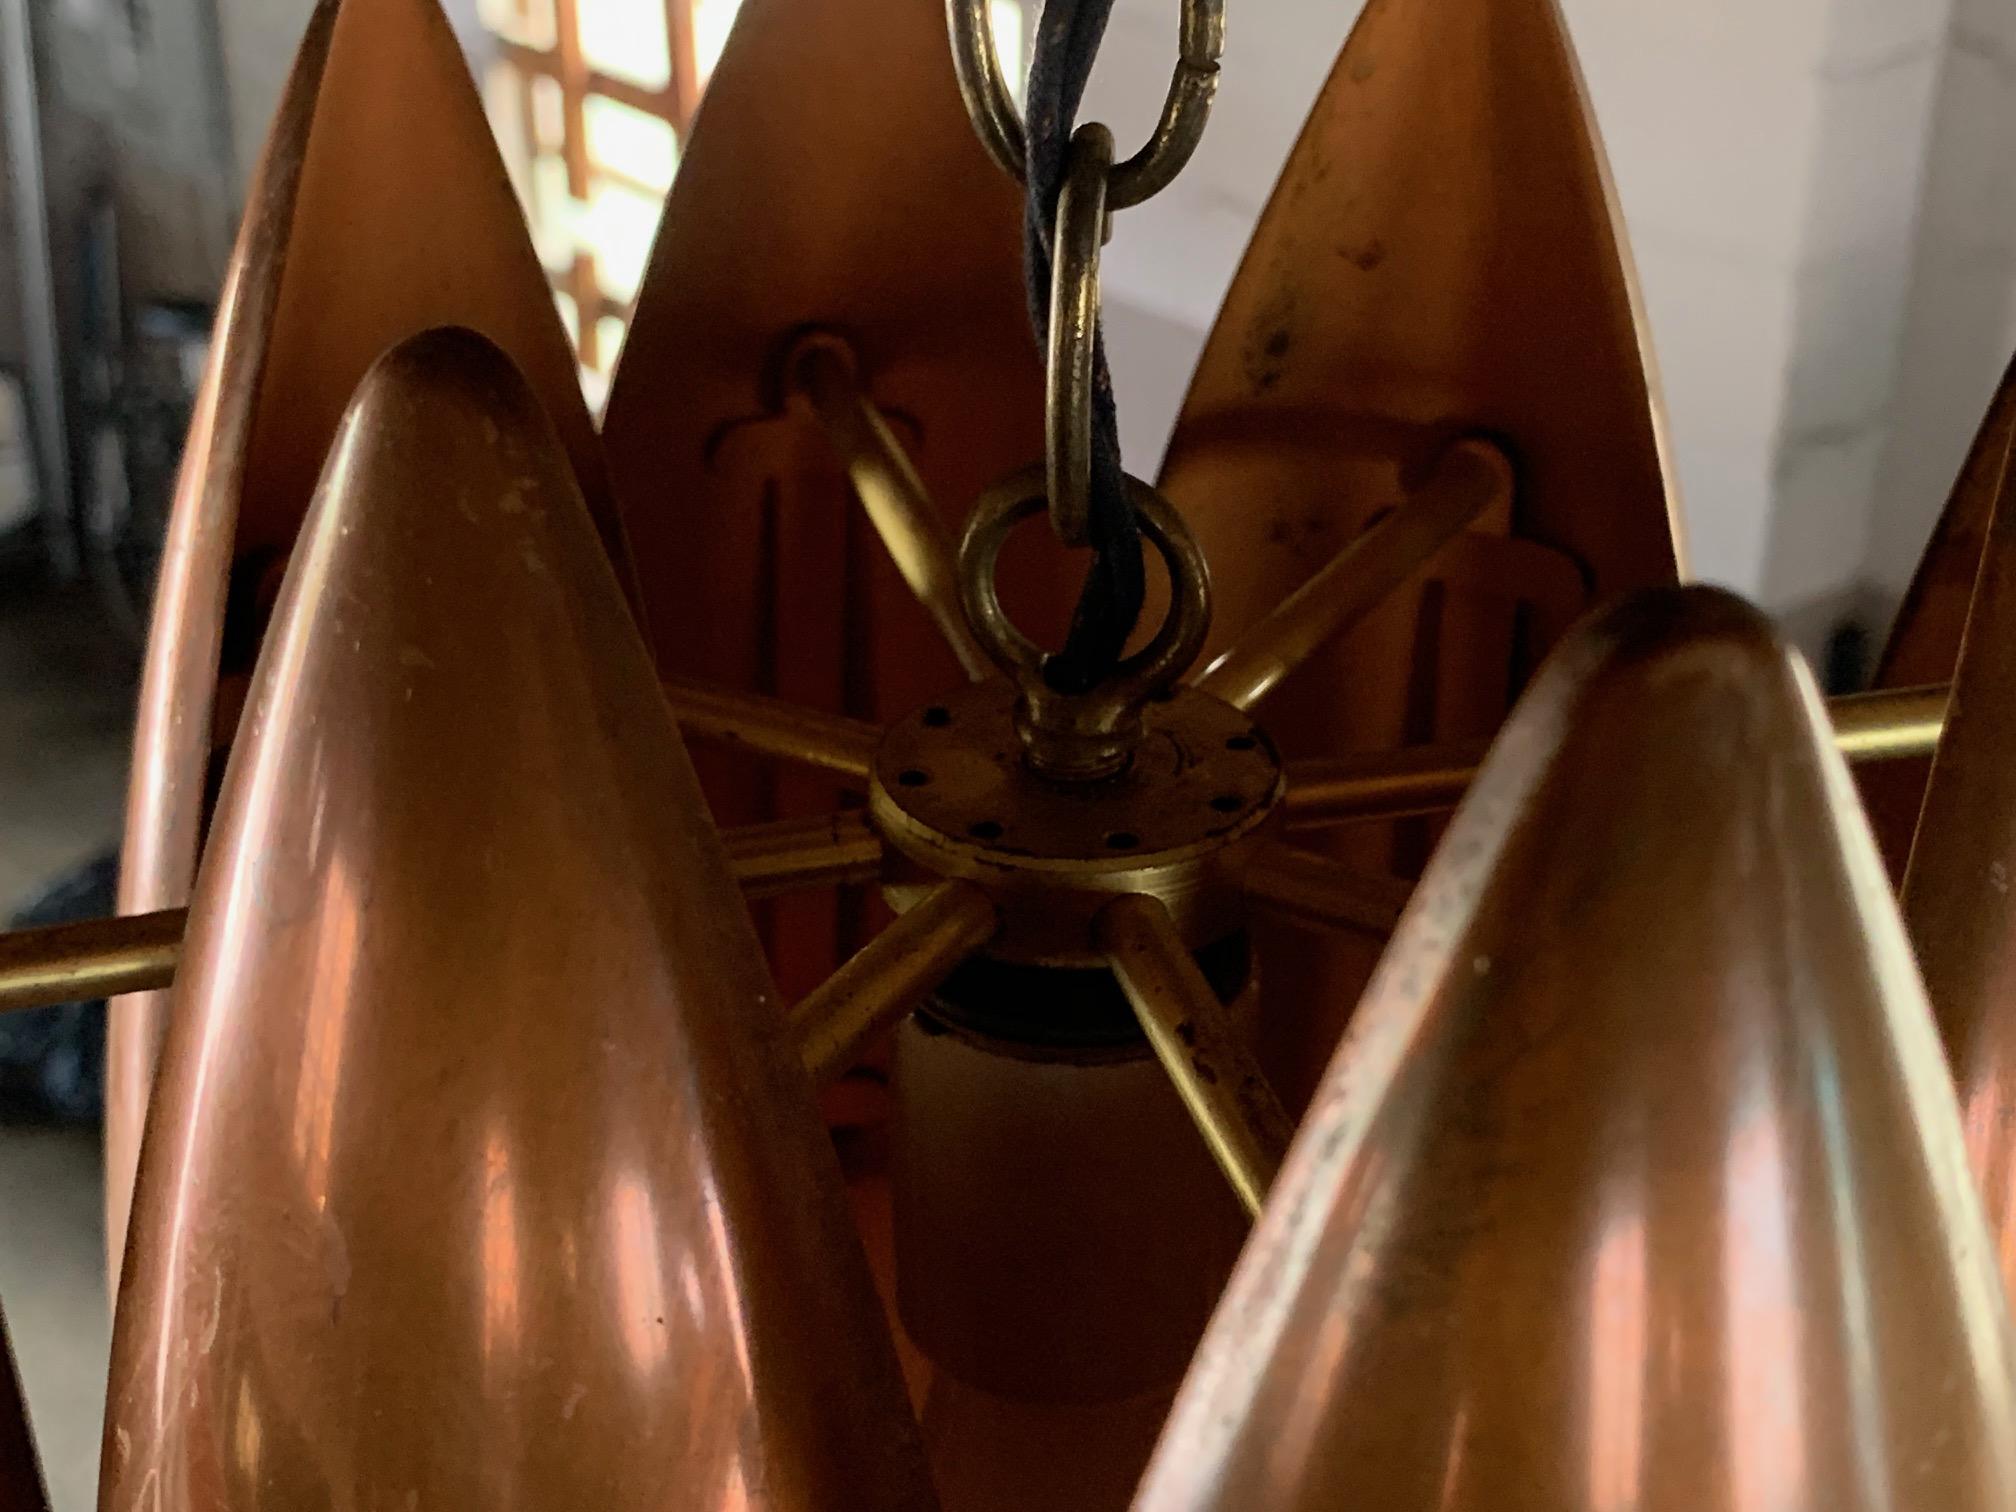 An unusual copper chandelier, distinctly modern, in the style of Hans-Agne Jacobsson.